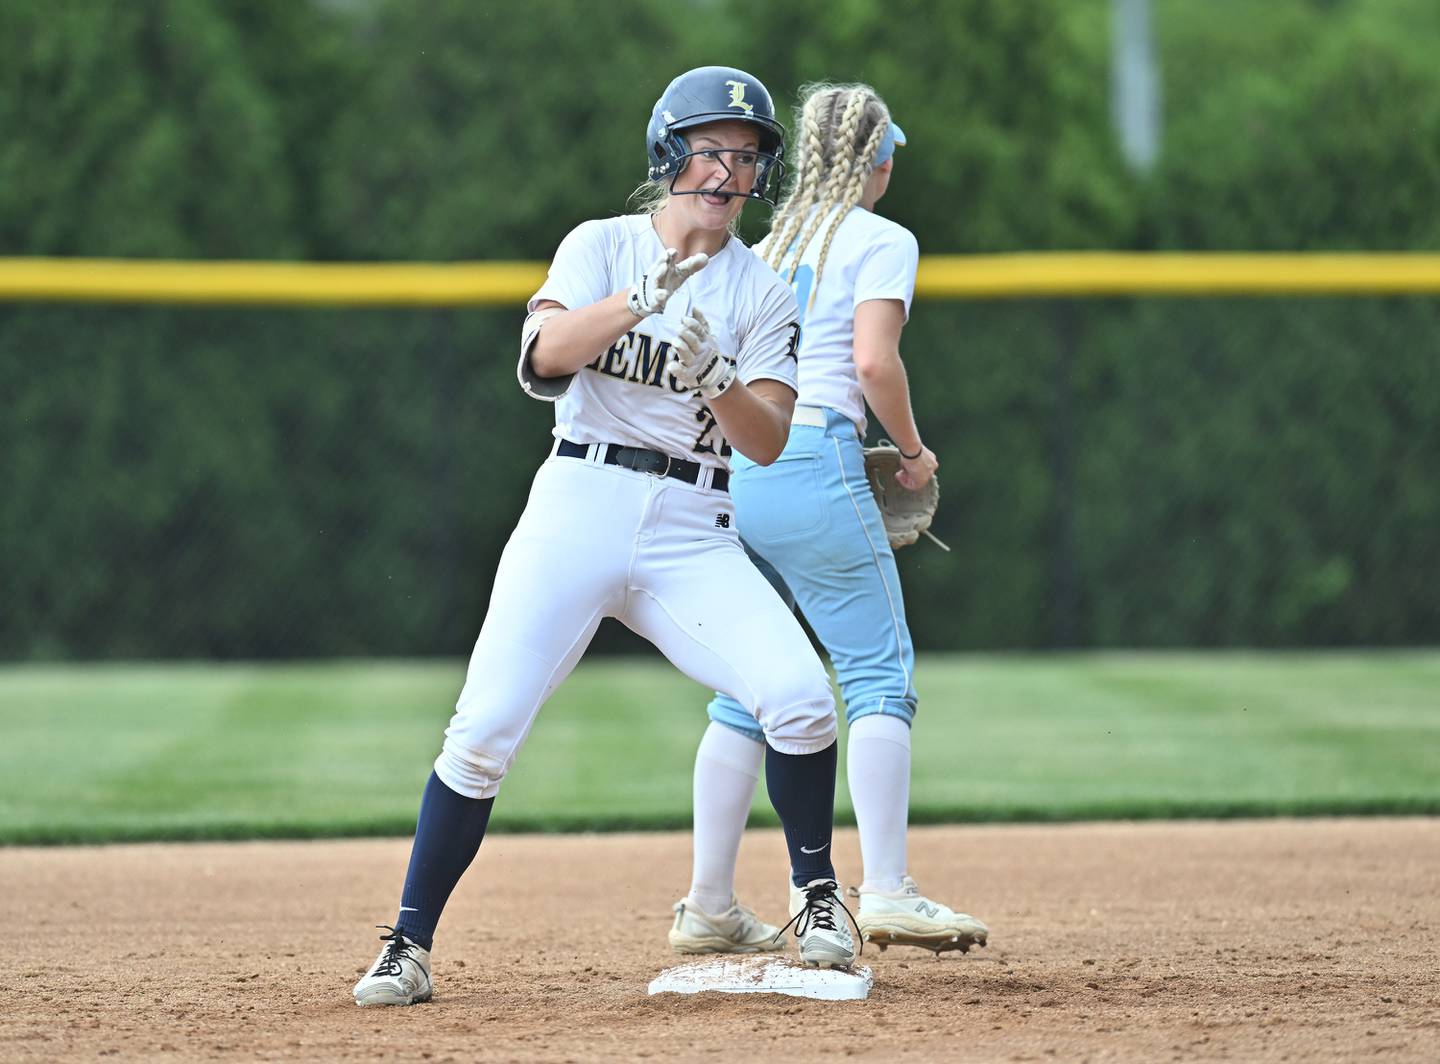 Lemont's Avaree Taylor reacts on second base during the Lemont Class 3A sectional semifinal game against Joliet Catholic on Wednesday, May. 31, 2023, at Lemont.